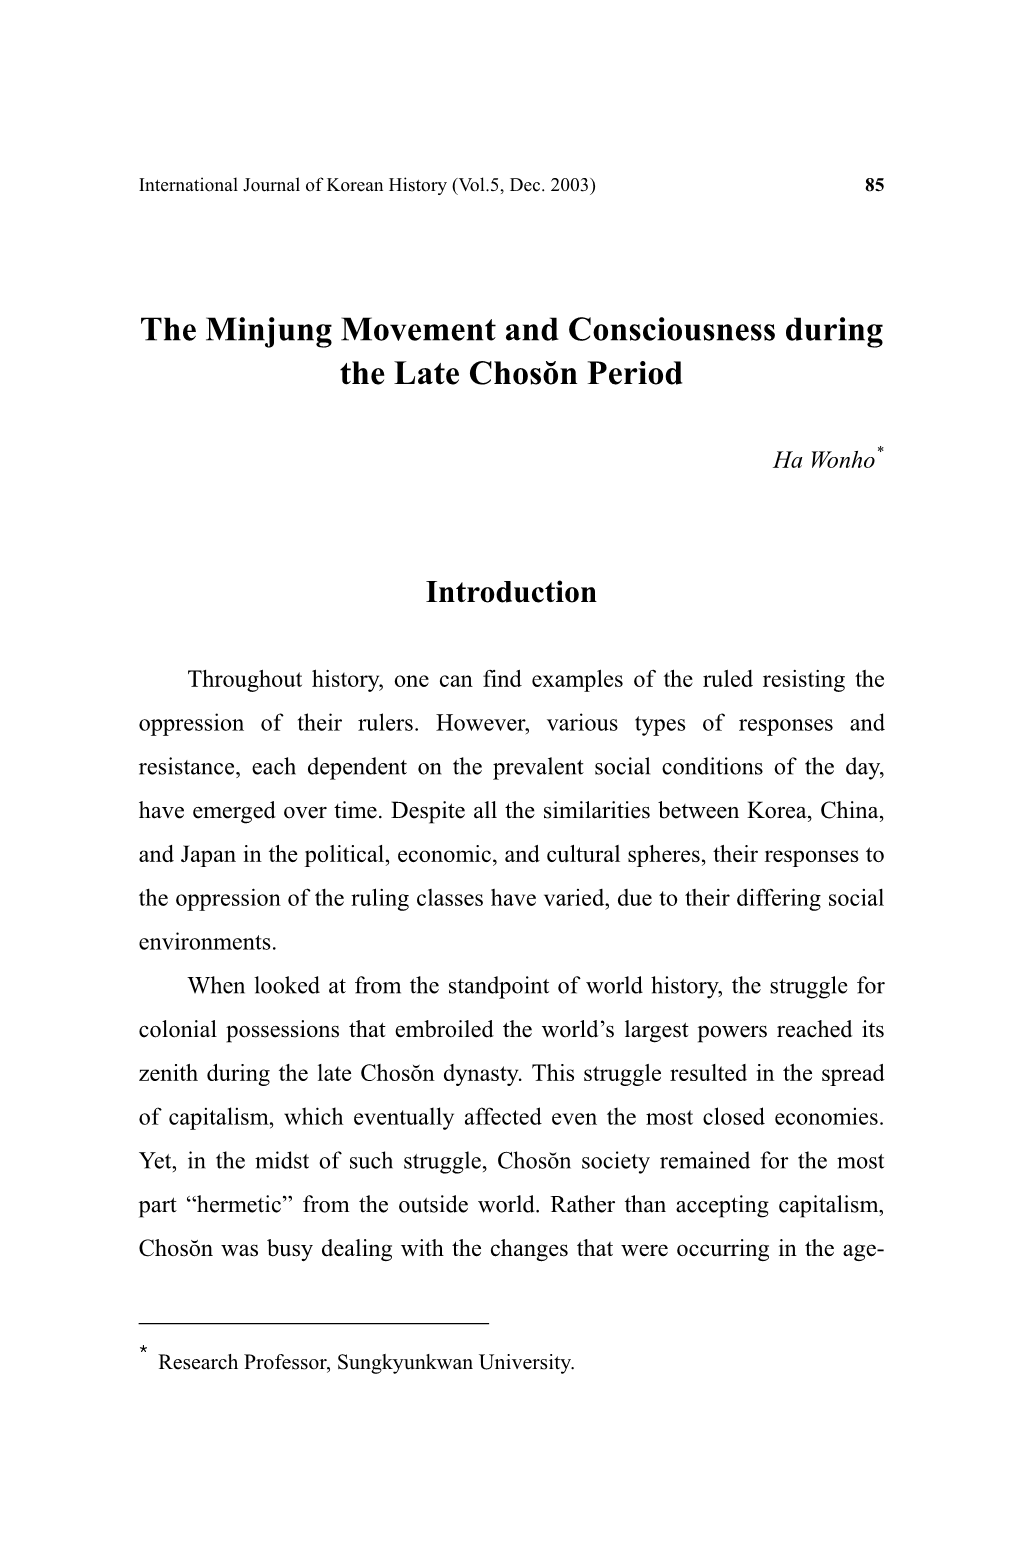 The Minjung Movement and Consciousness During Later Choson